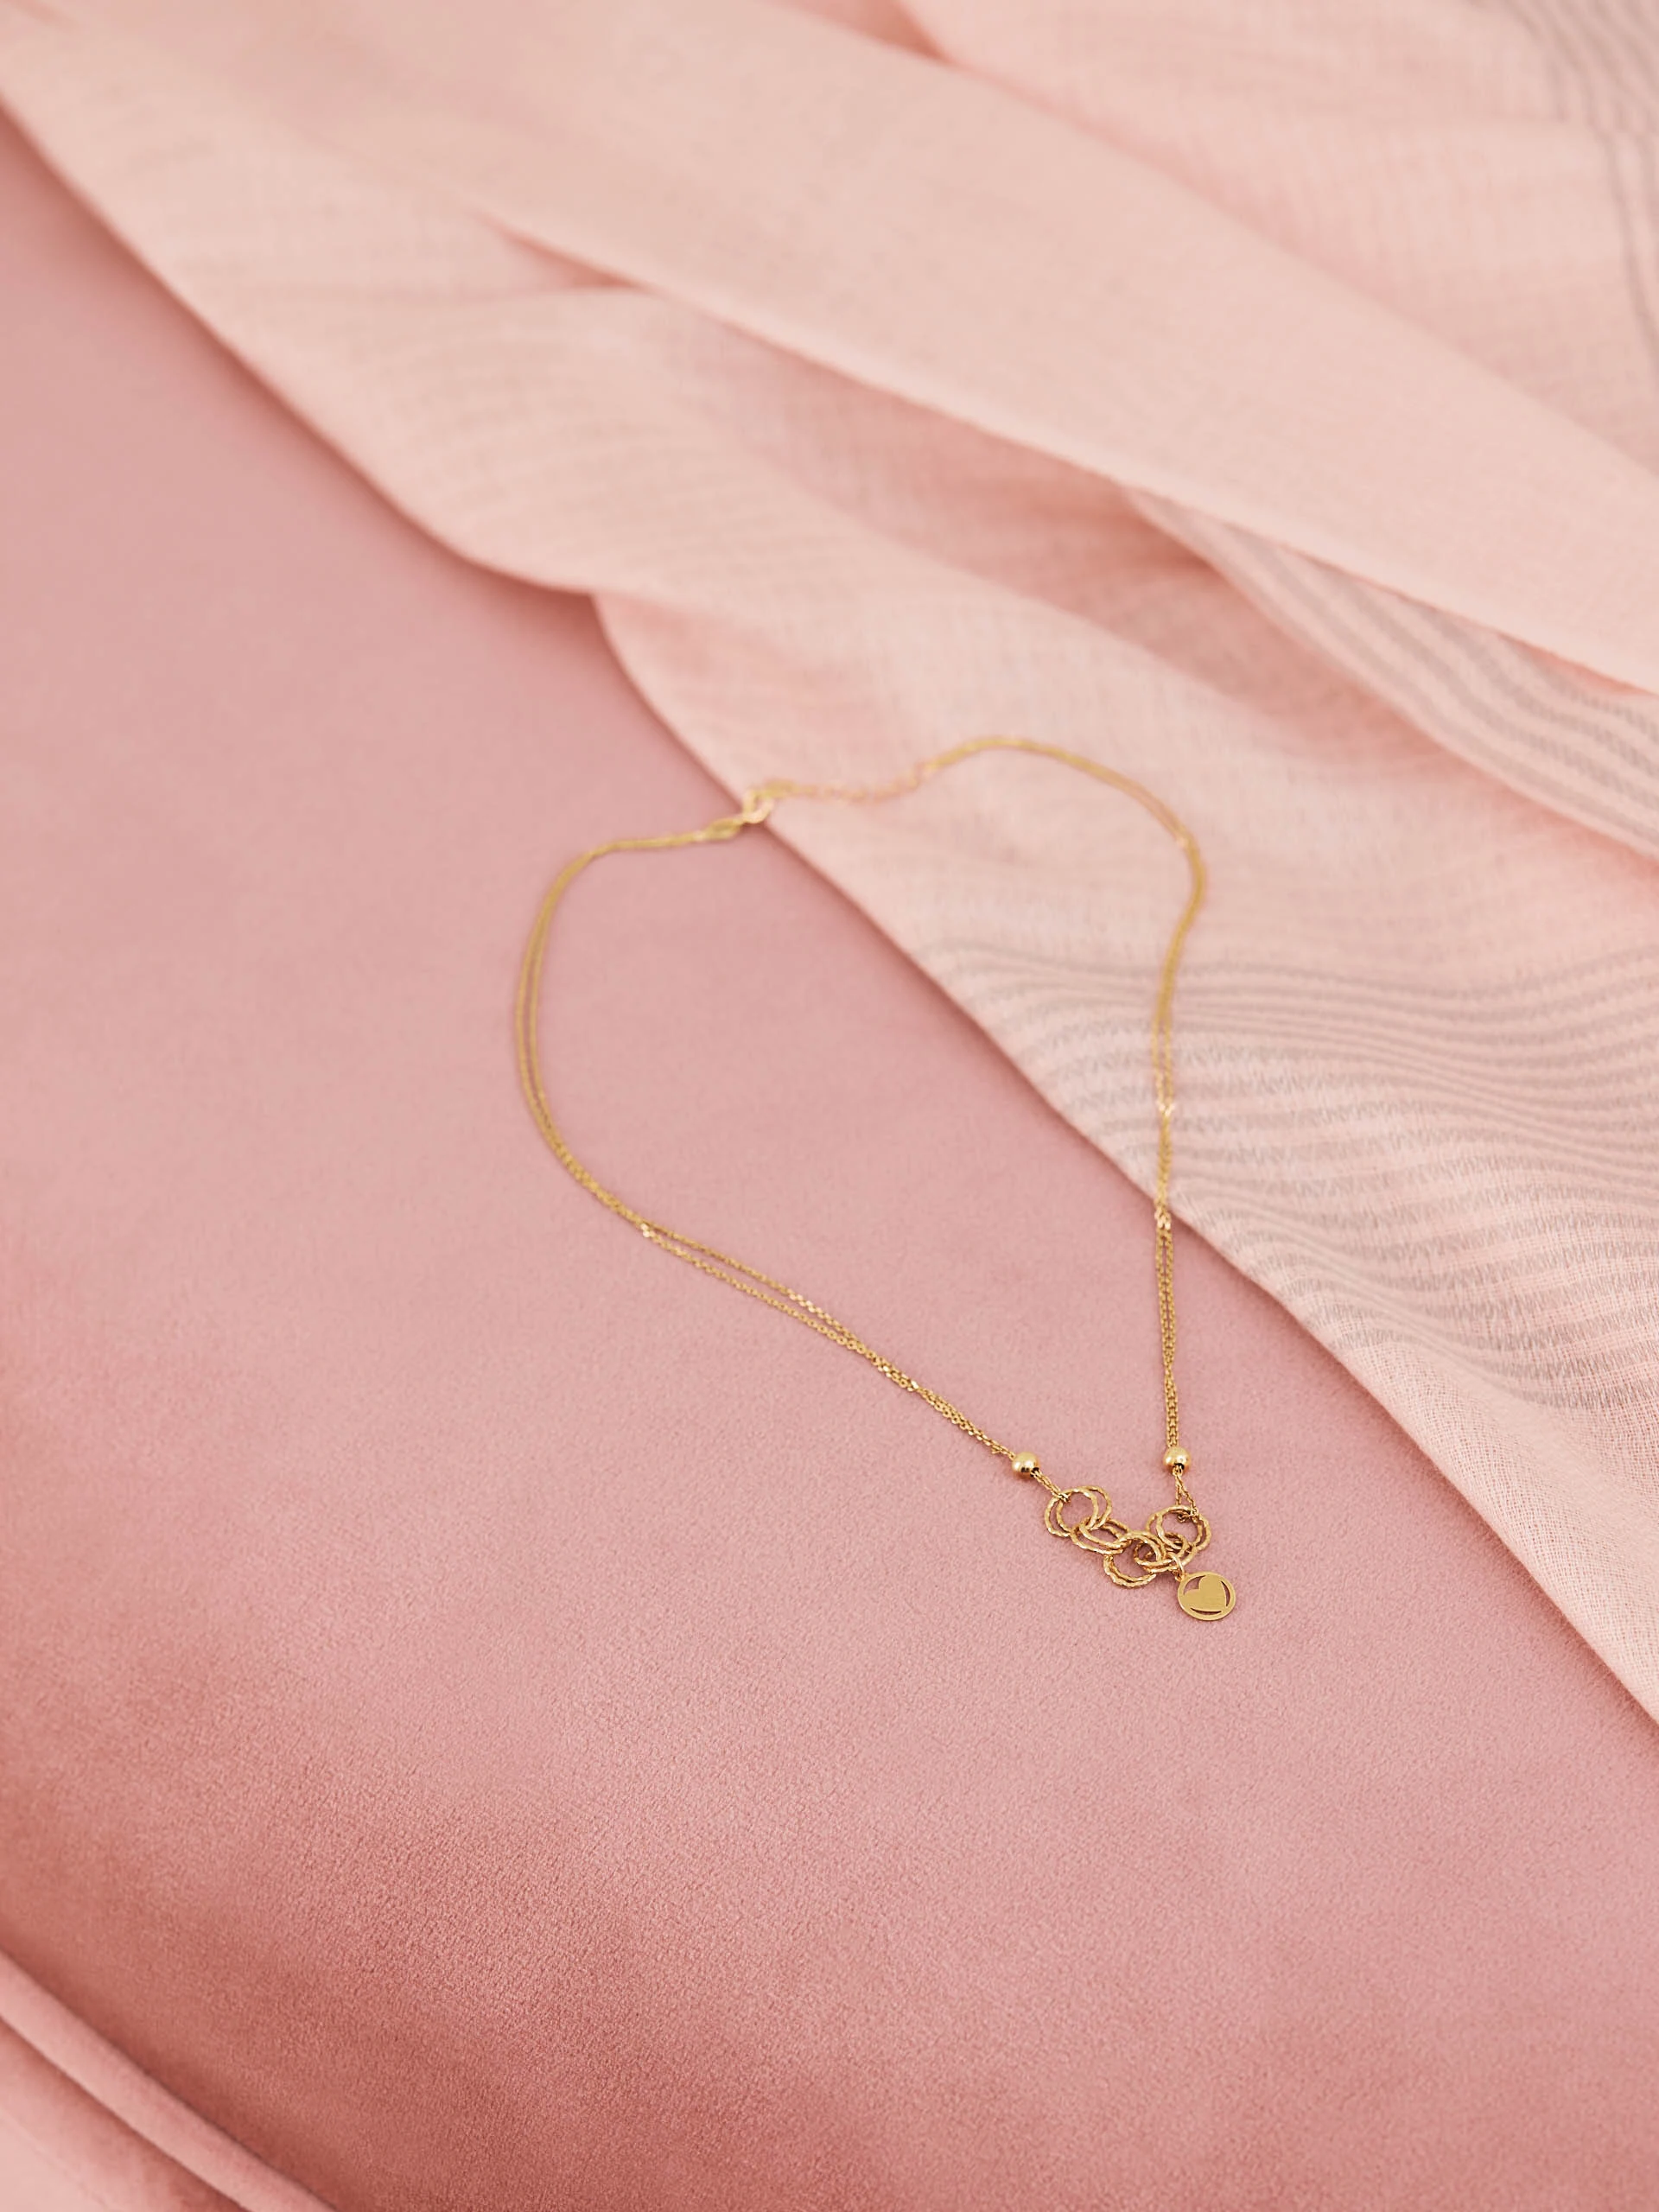 GOLD-PLATED NECKLACE WITH HEART-SHAPED PENDANT